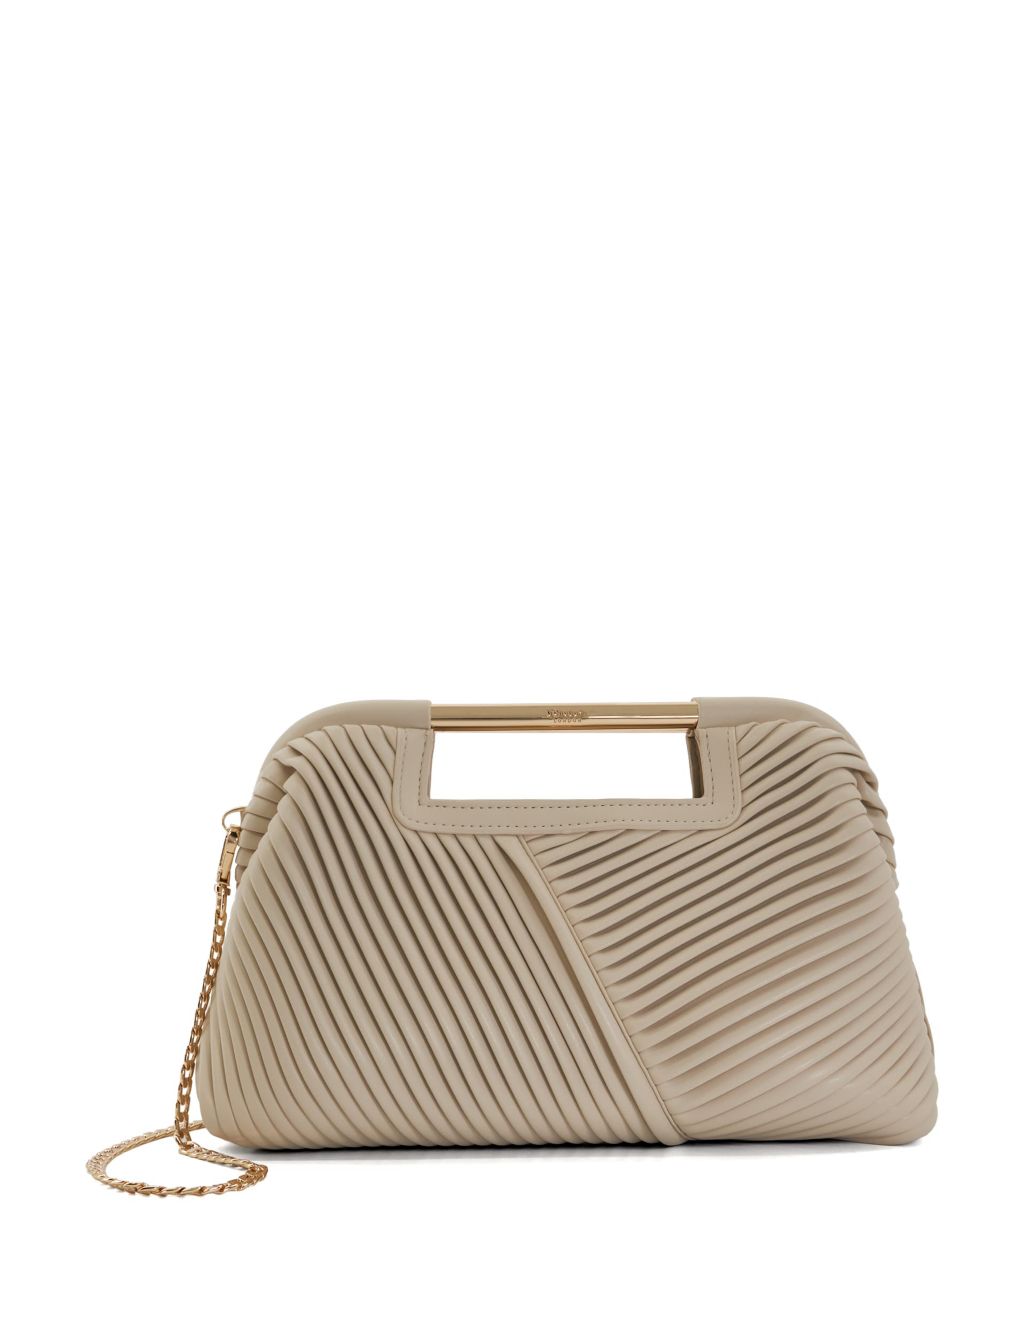 Pleated Chain Strap Clutch Bag image 1